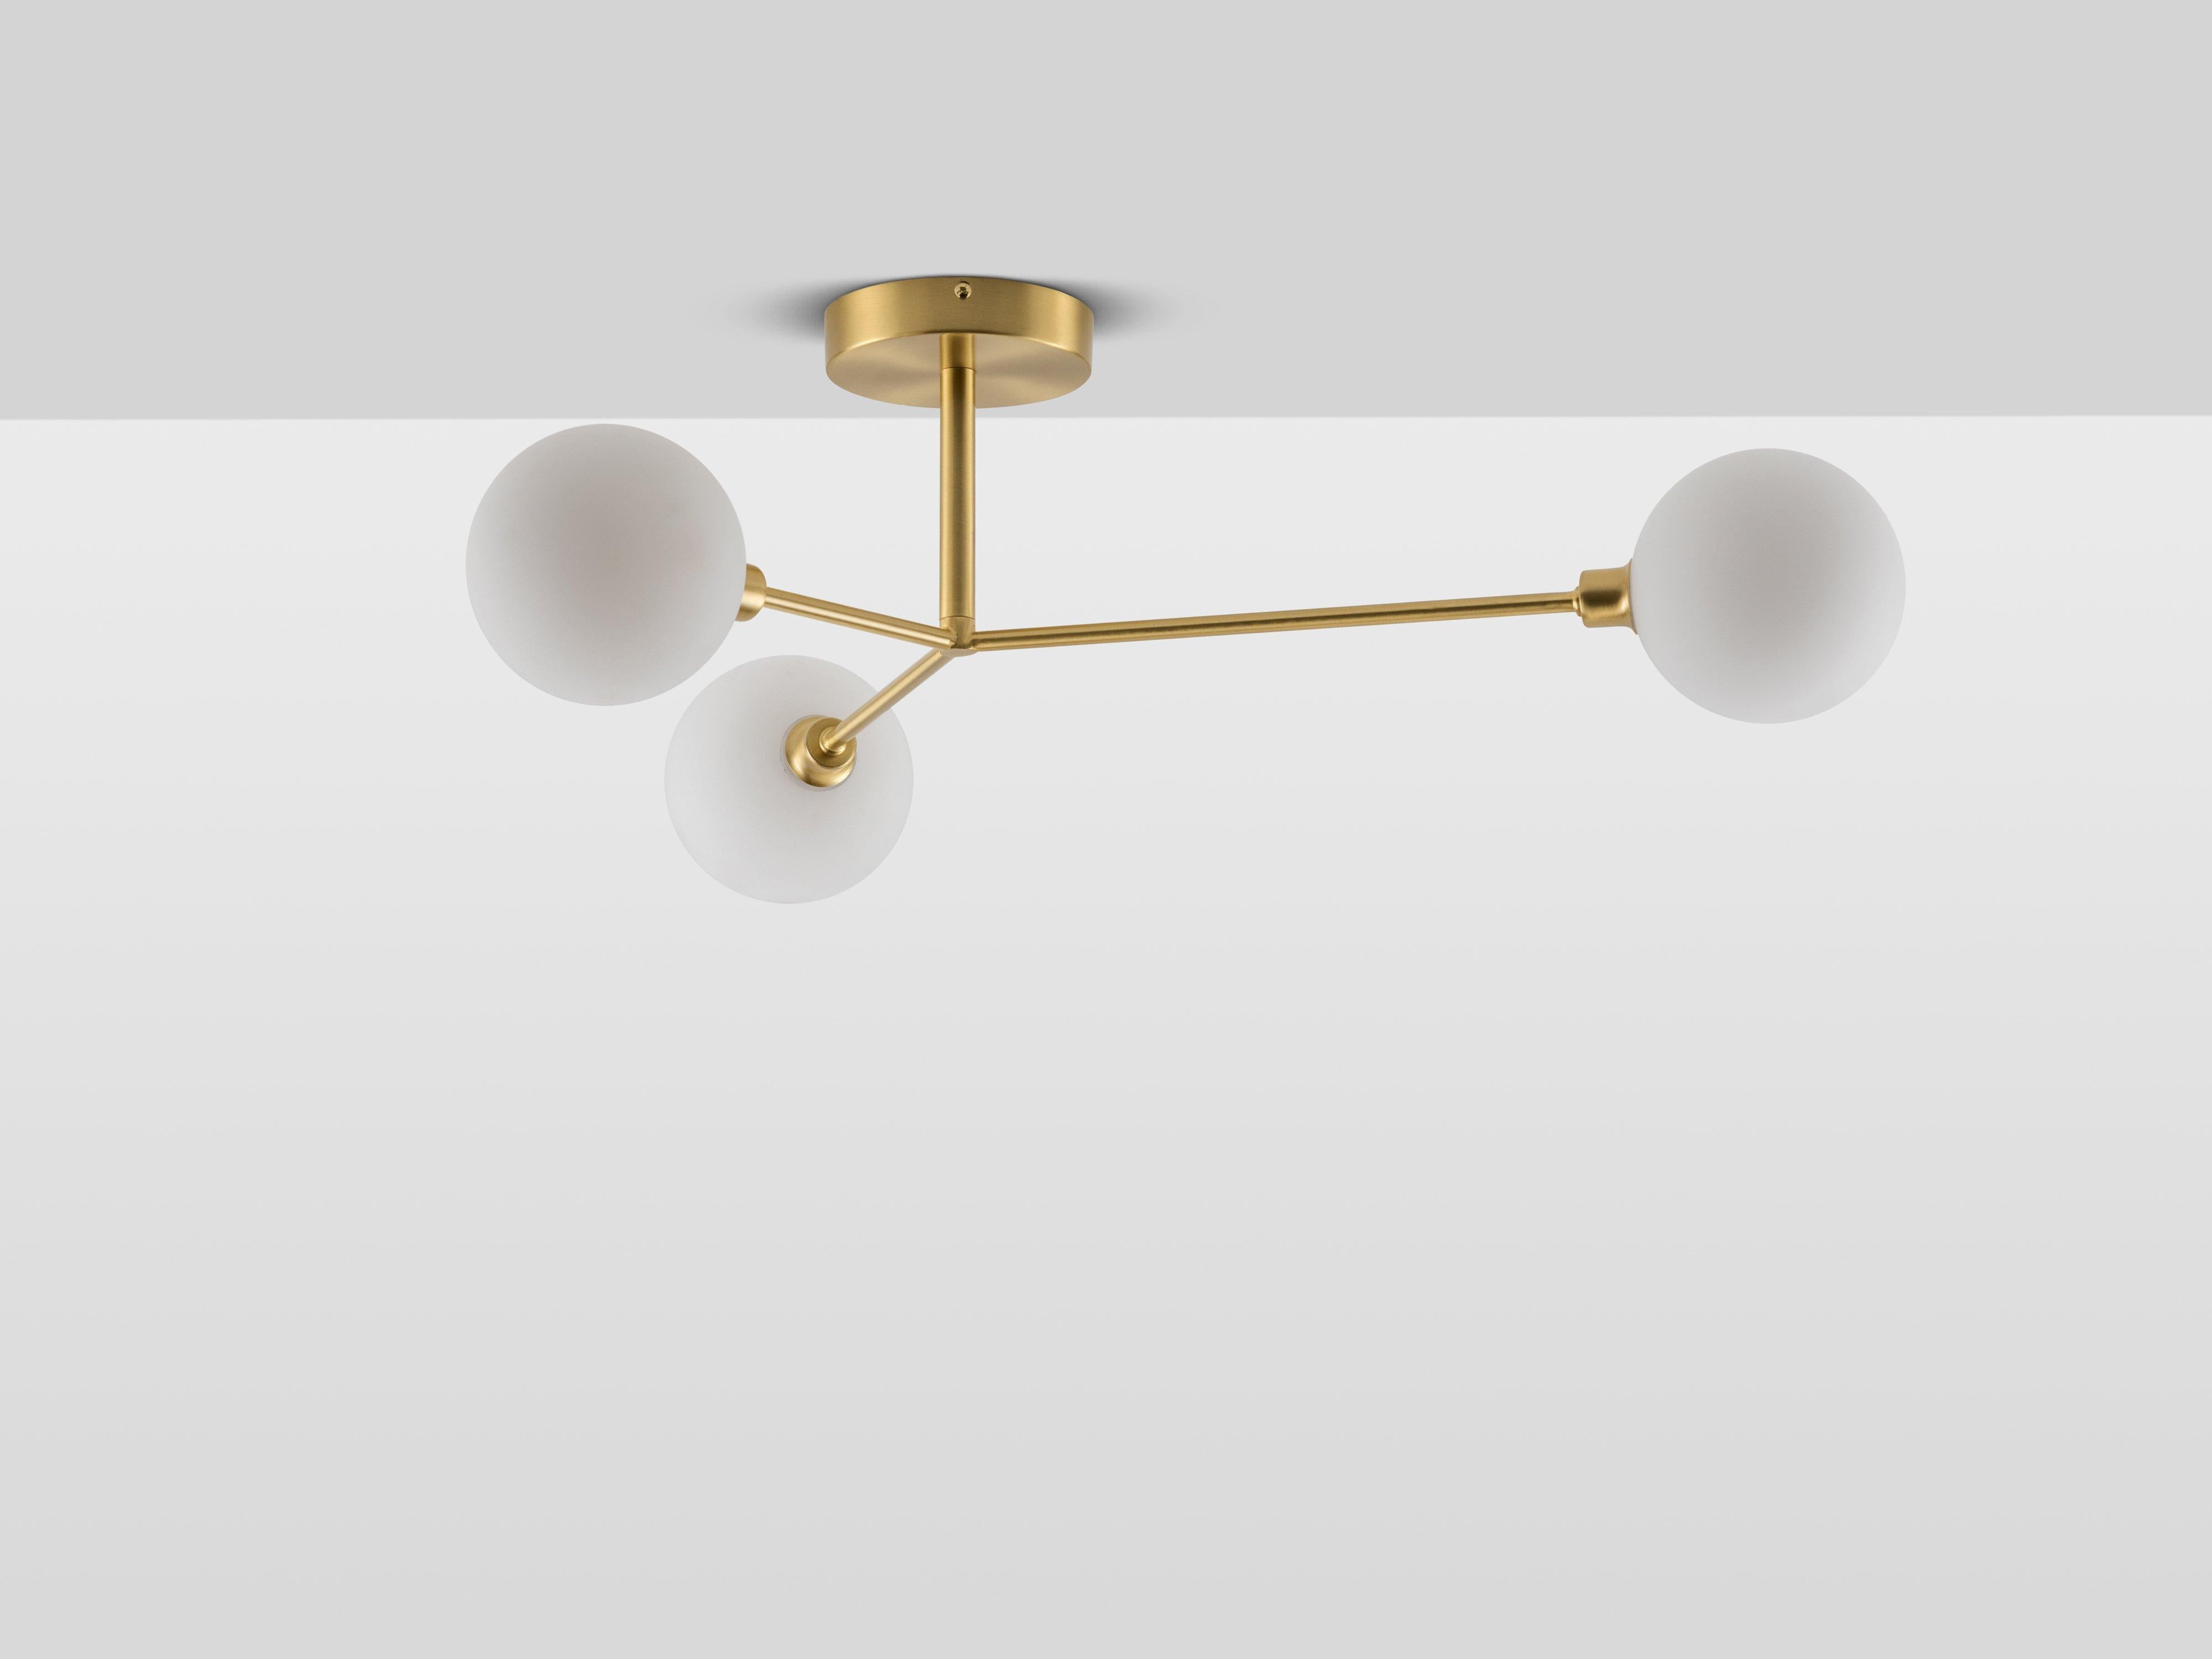 This contemporary ceiling light is the perfect statement piece. Three metal stems hold our opal glass shades, which diffuse a warm illuminating glow, reminiscent of sunshine. Ideal for a dining space or living room, this modern classic will add the